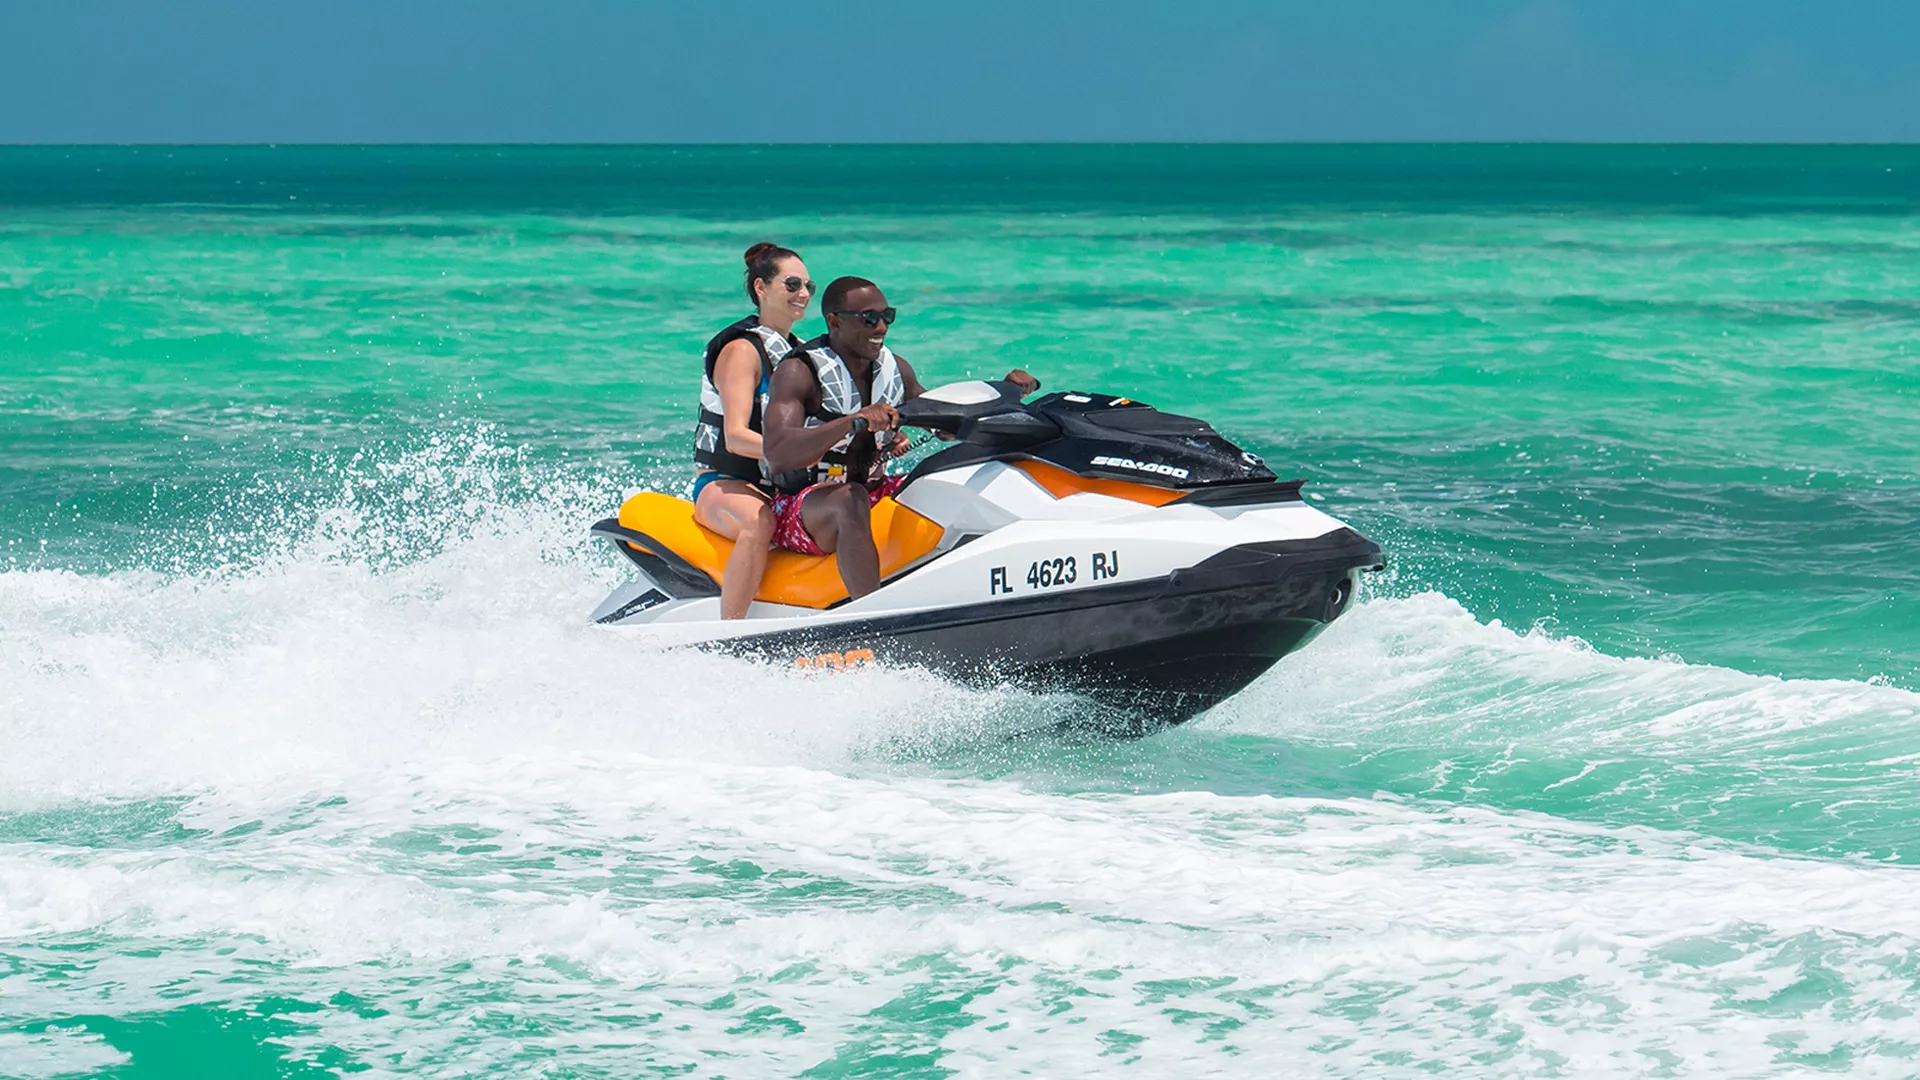 Jet Ski Tours in Spain, Europe | Water Skiing,Jet Skiing - Rated 4.8